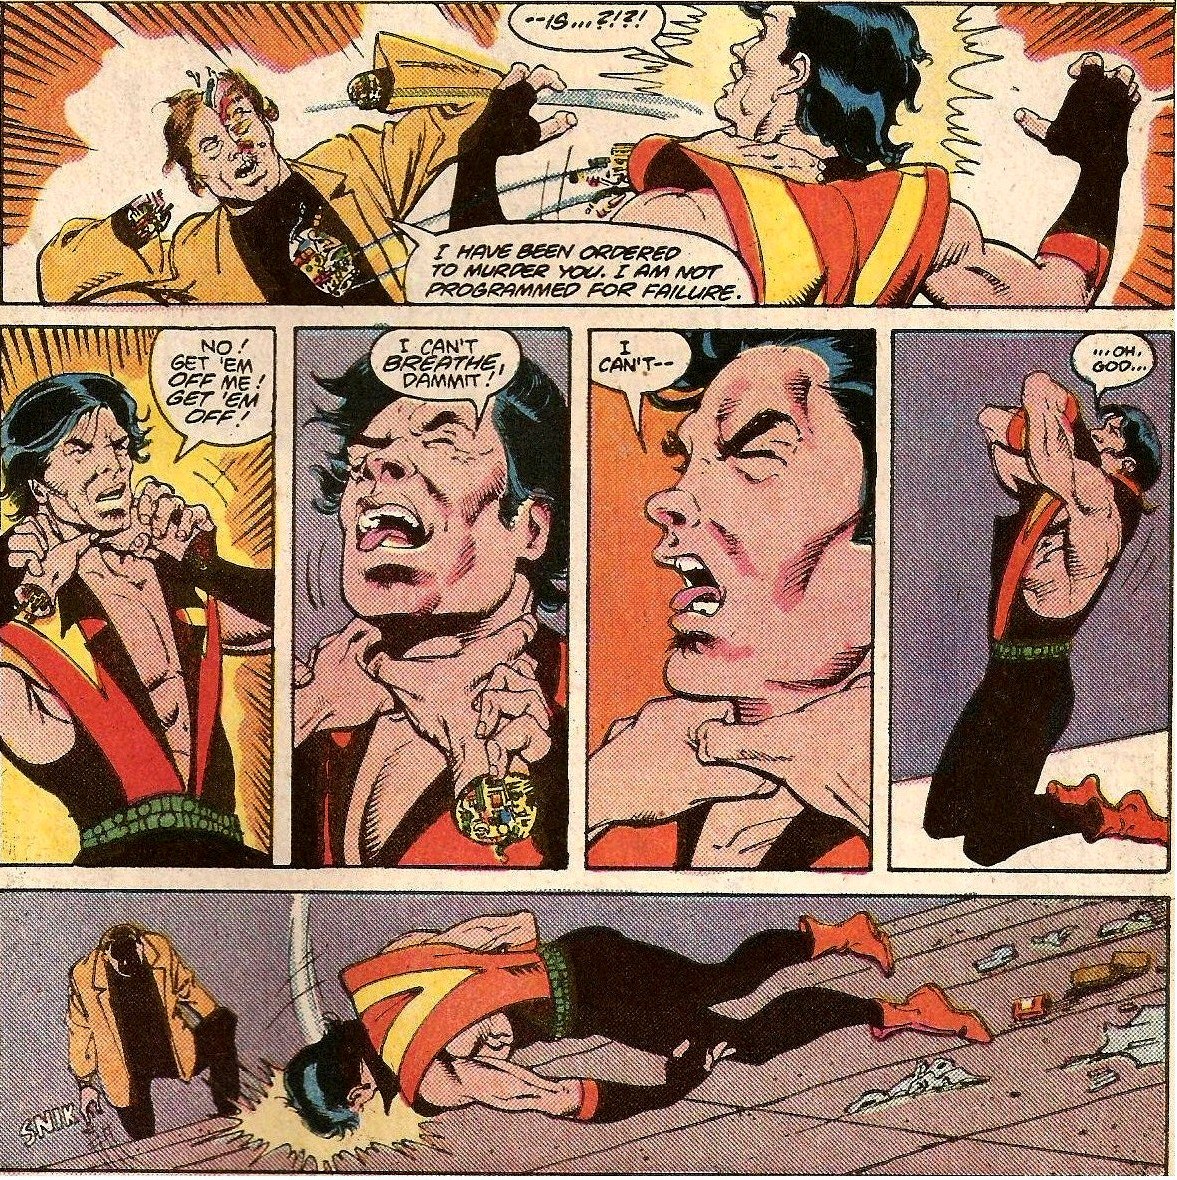 From Justice League of America (Vol. 1) #258 (1987)